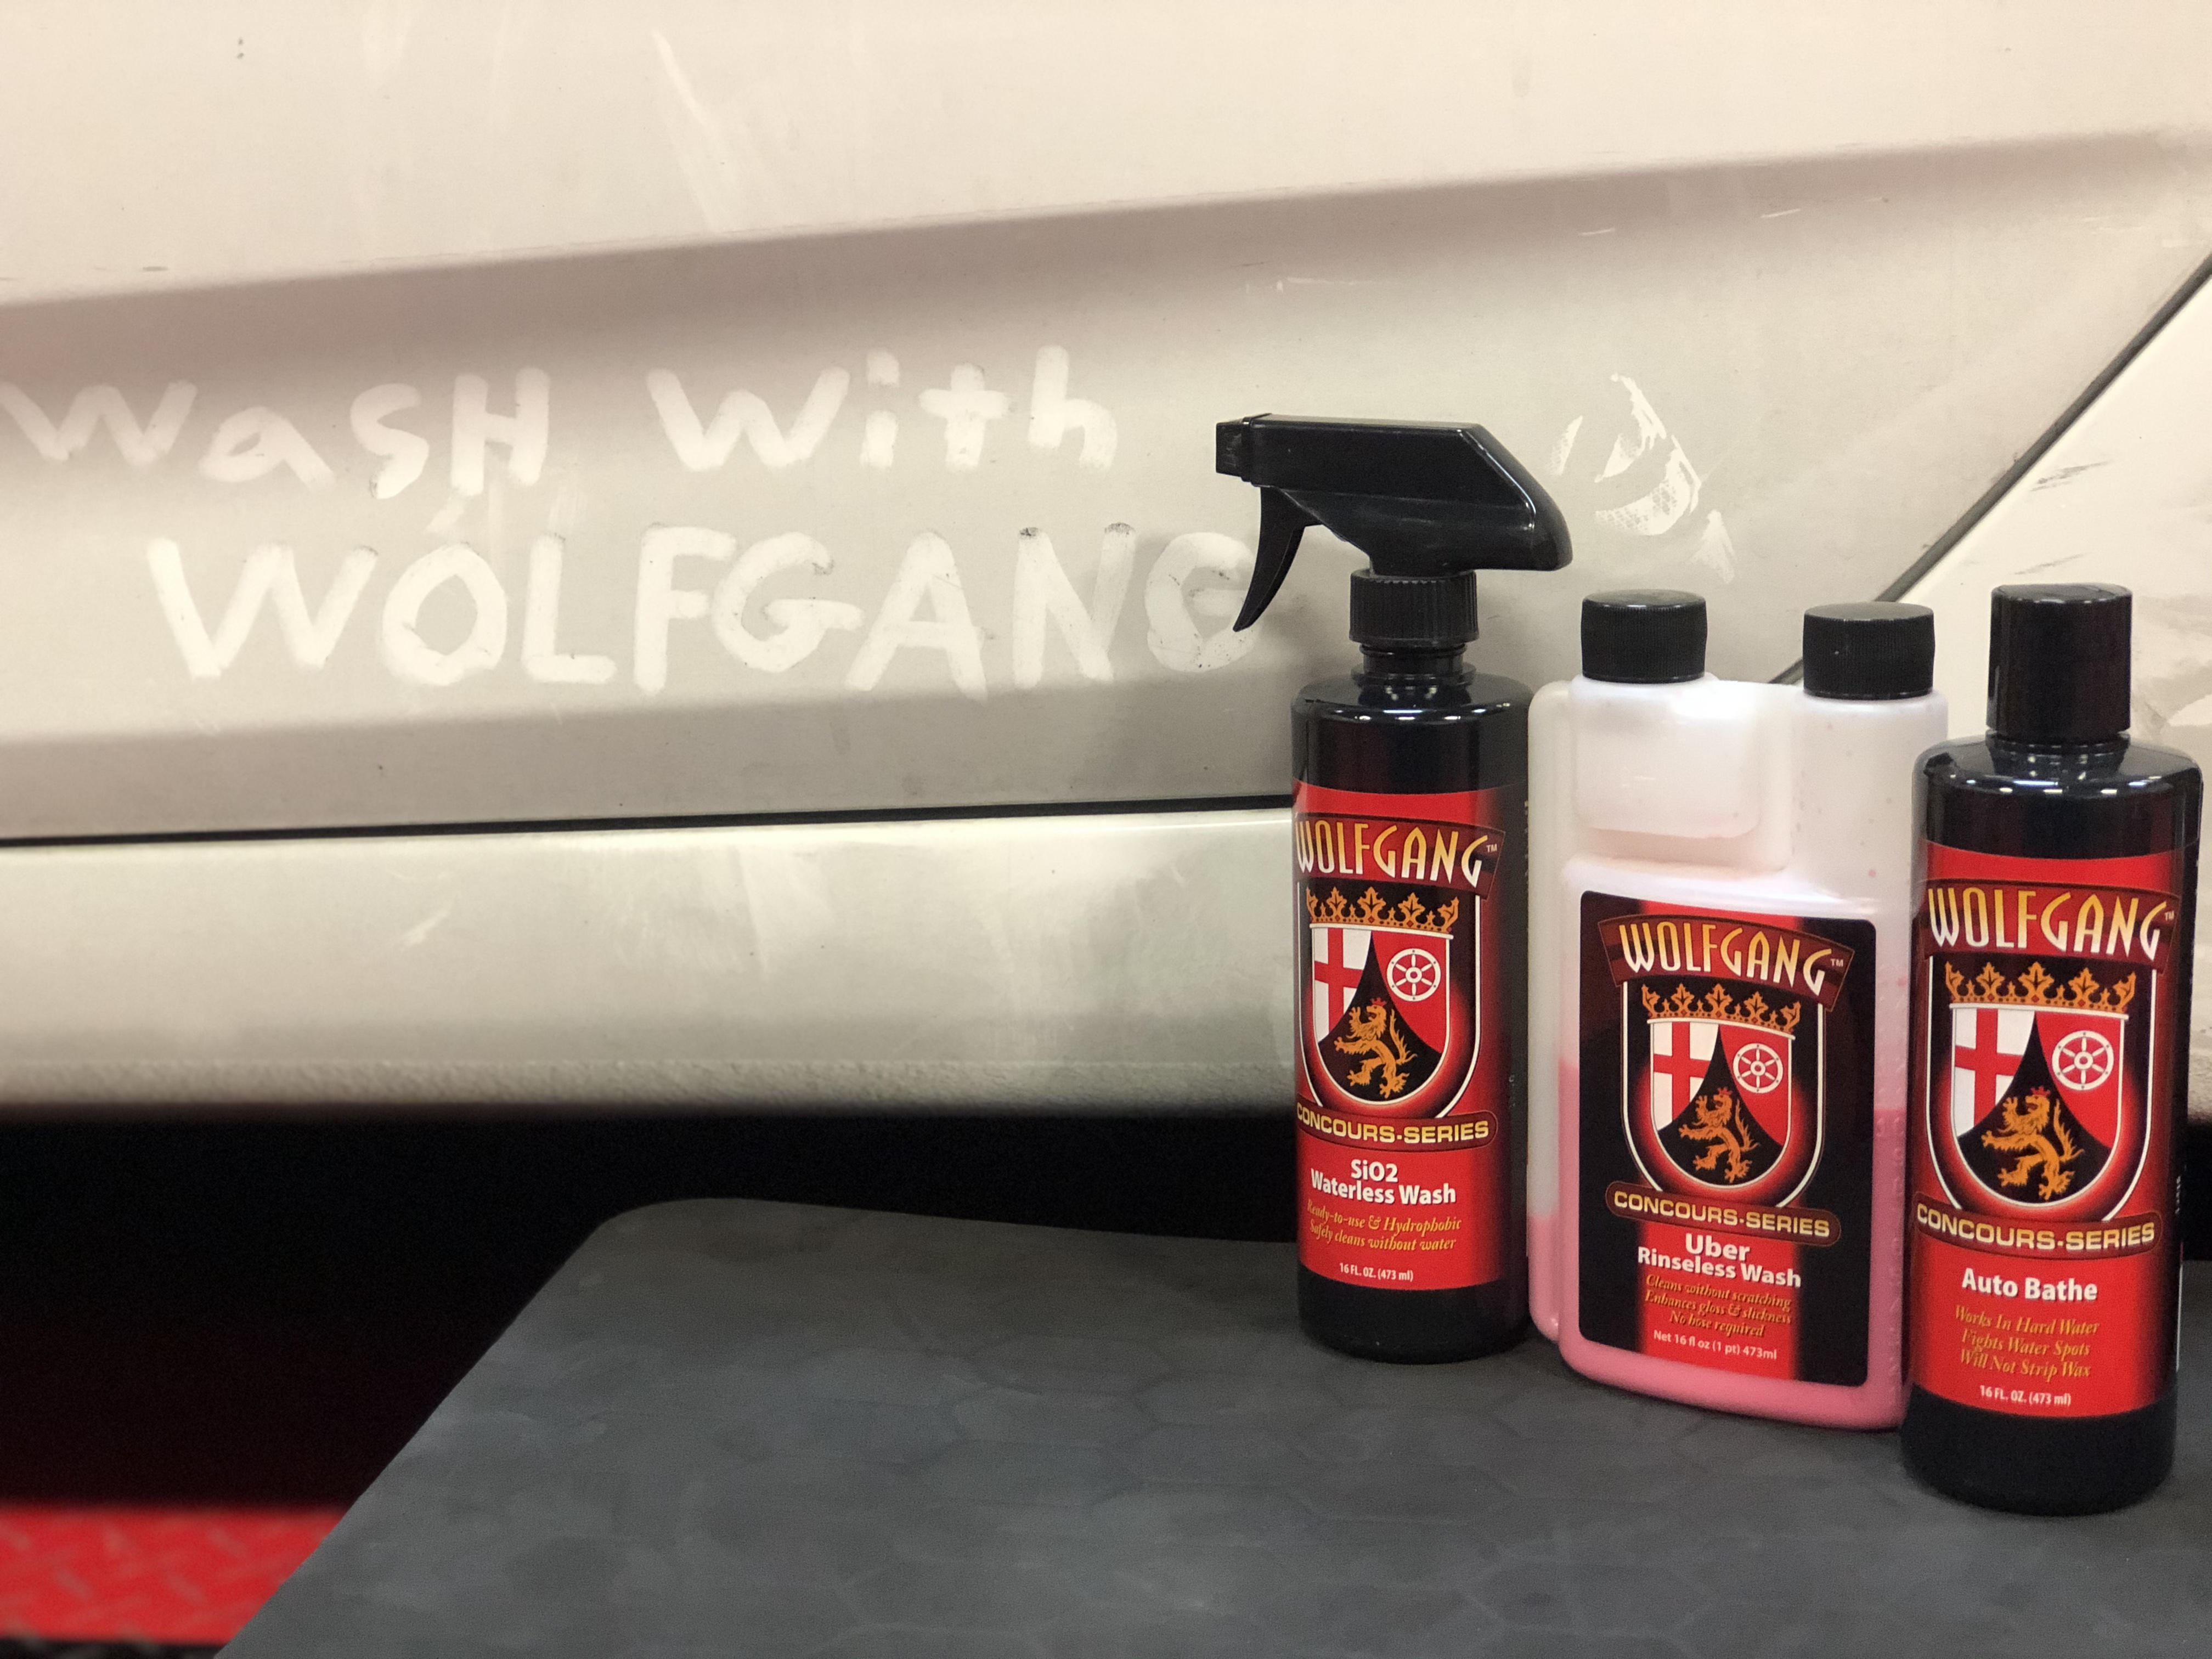 3 Ways to Wash your Car with Wolfgang